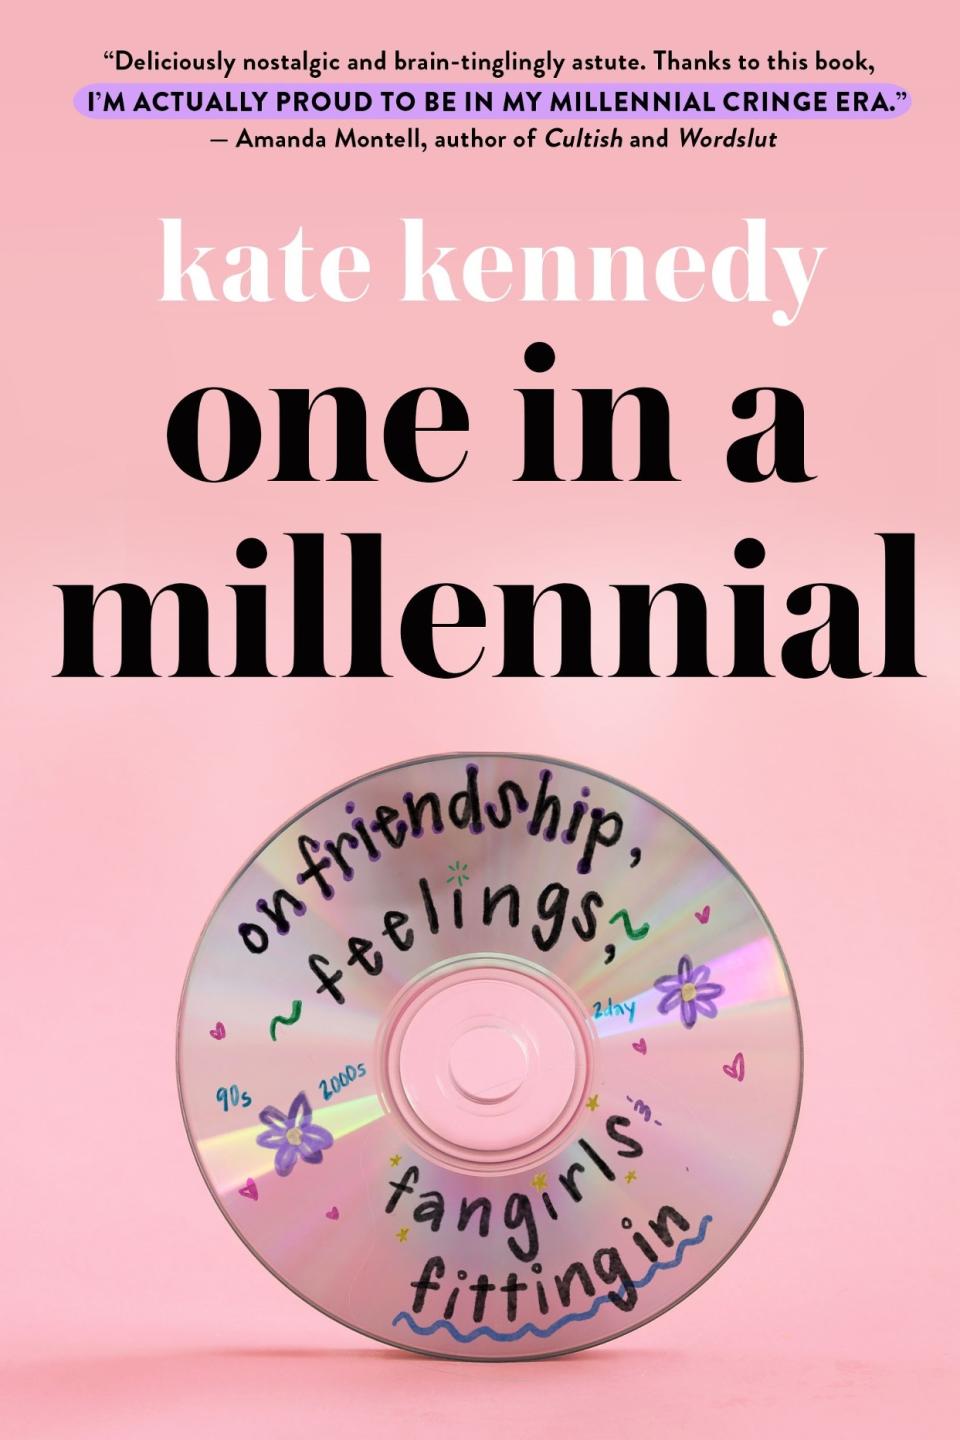 "One In a Millennial: On Friendship, Feelings, Fangirls, and Fitting In" by Kate Kennedy